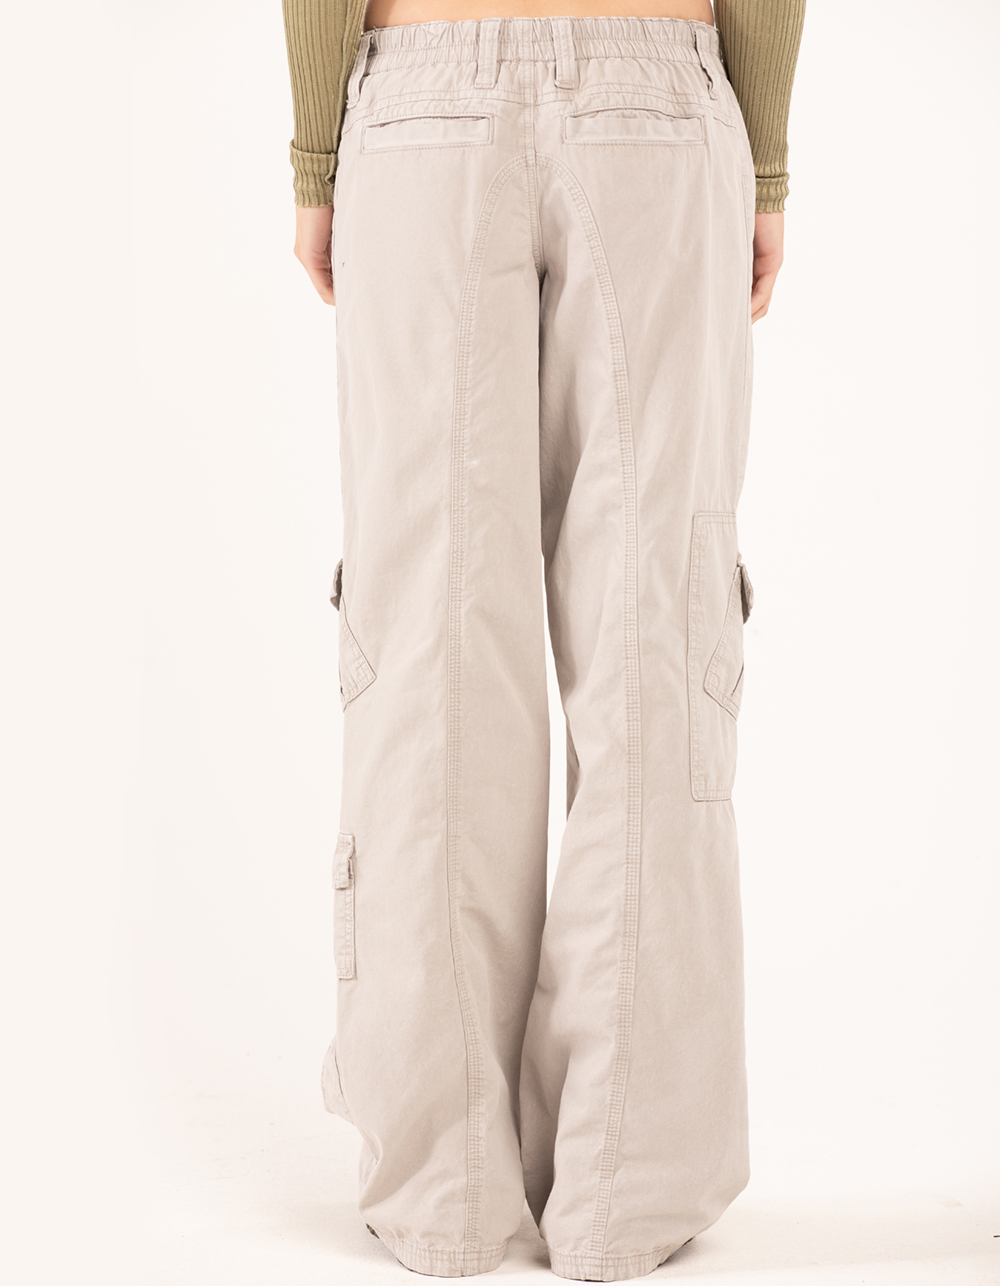 BDG Urban Outfitters Womens Winter Y2K Cargo Pants - LIGHT GRAY | Tillys